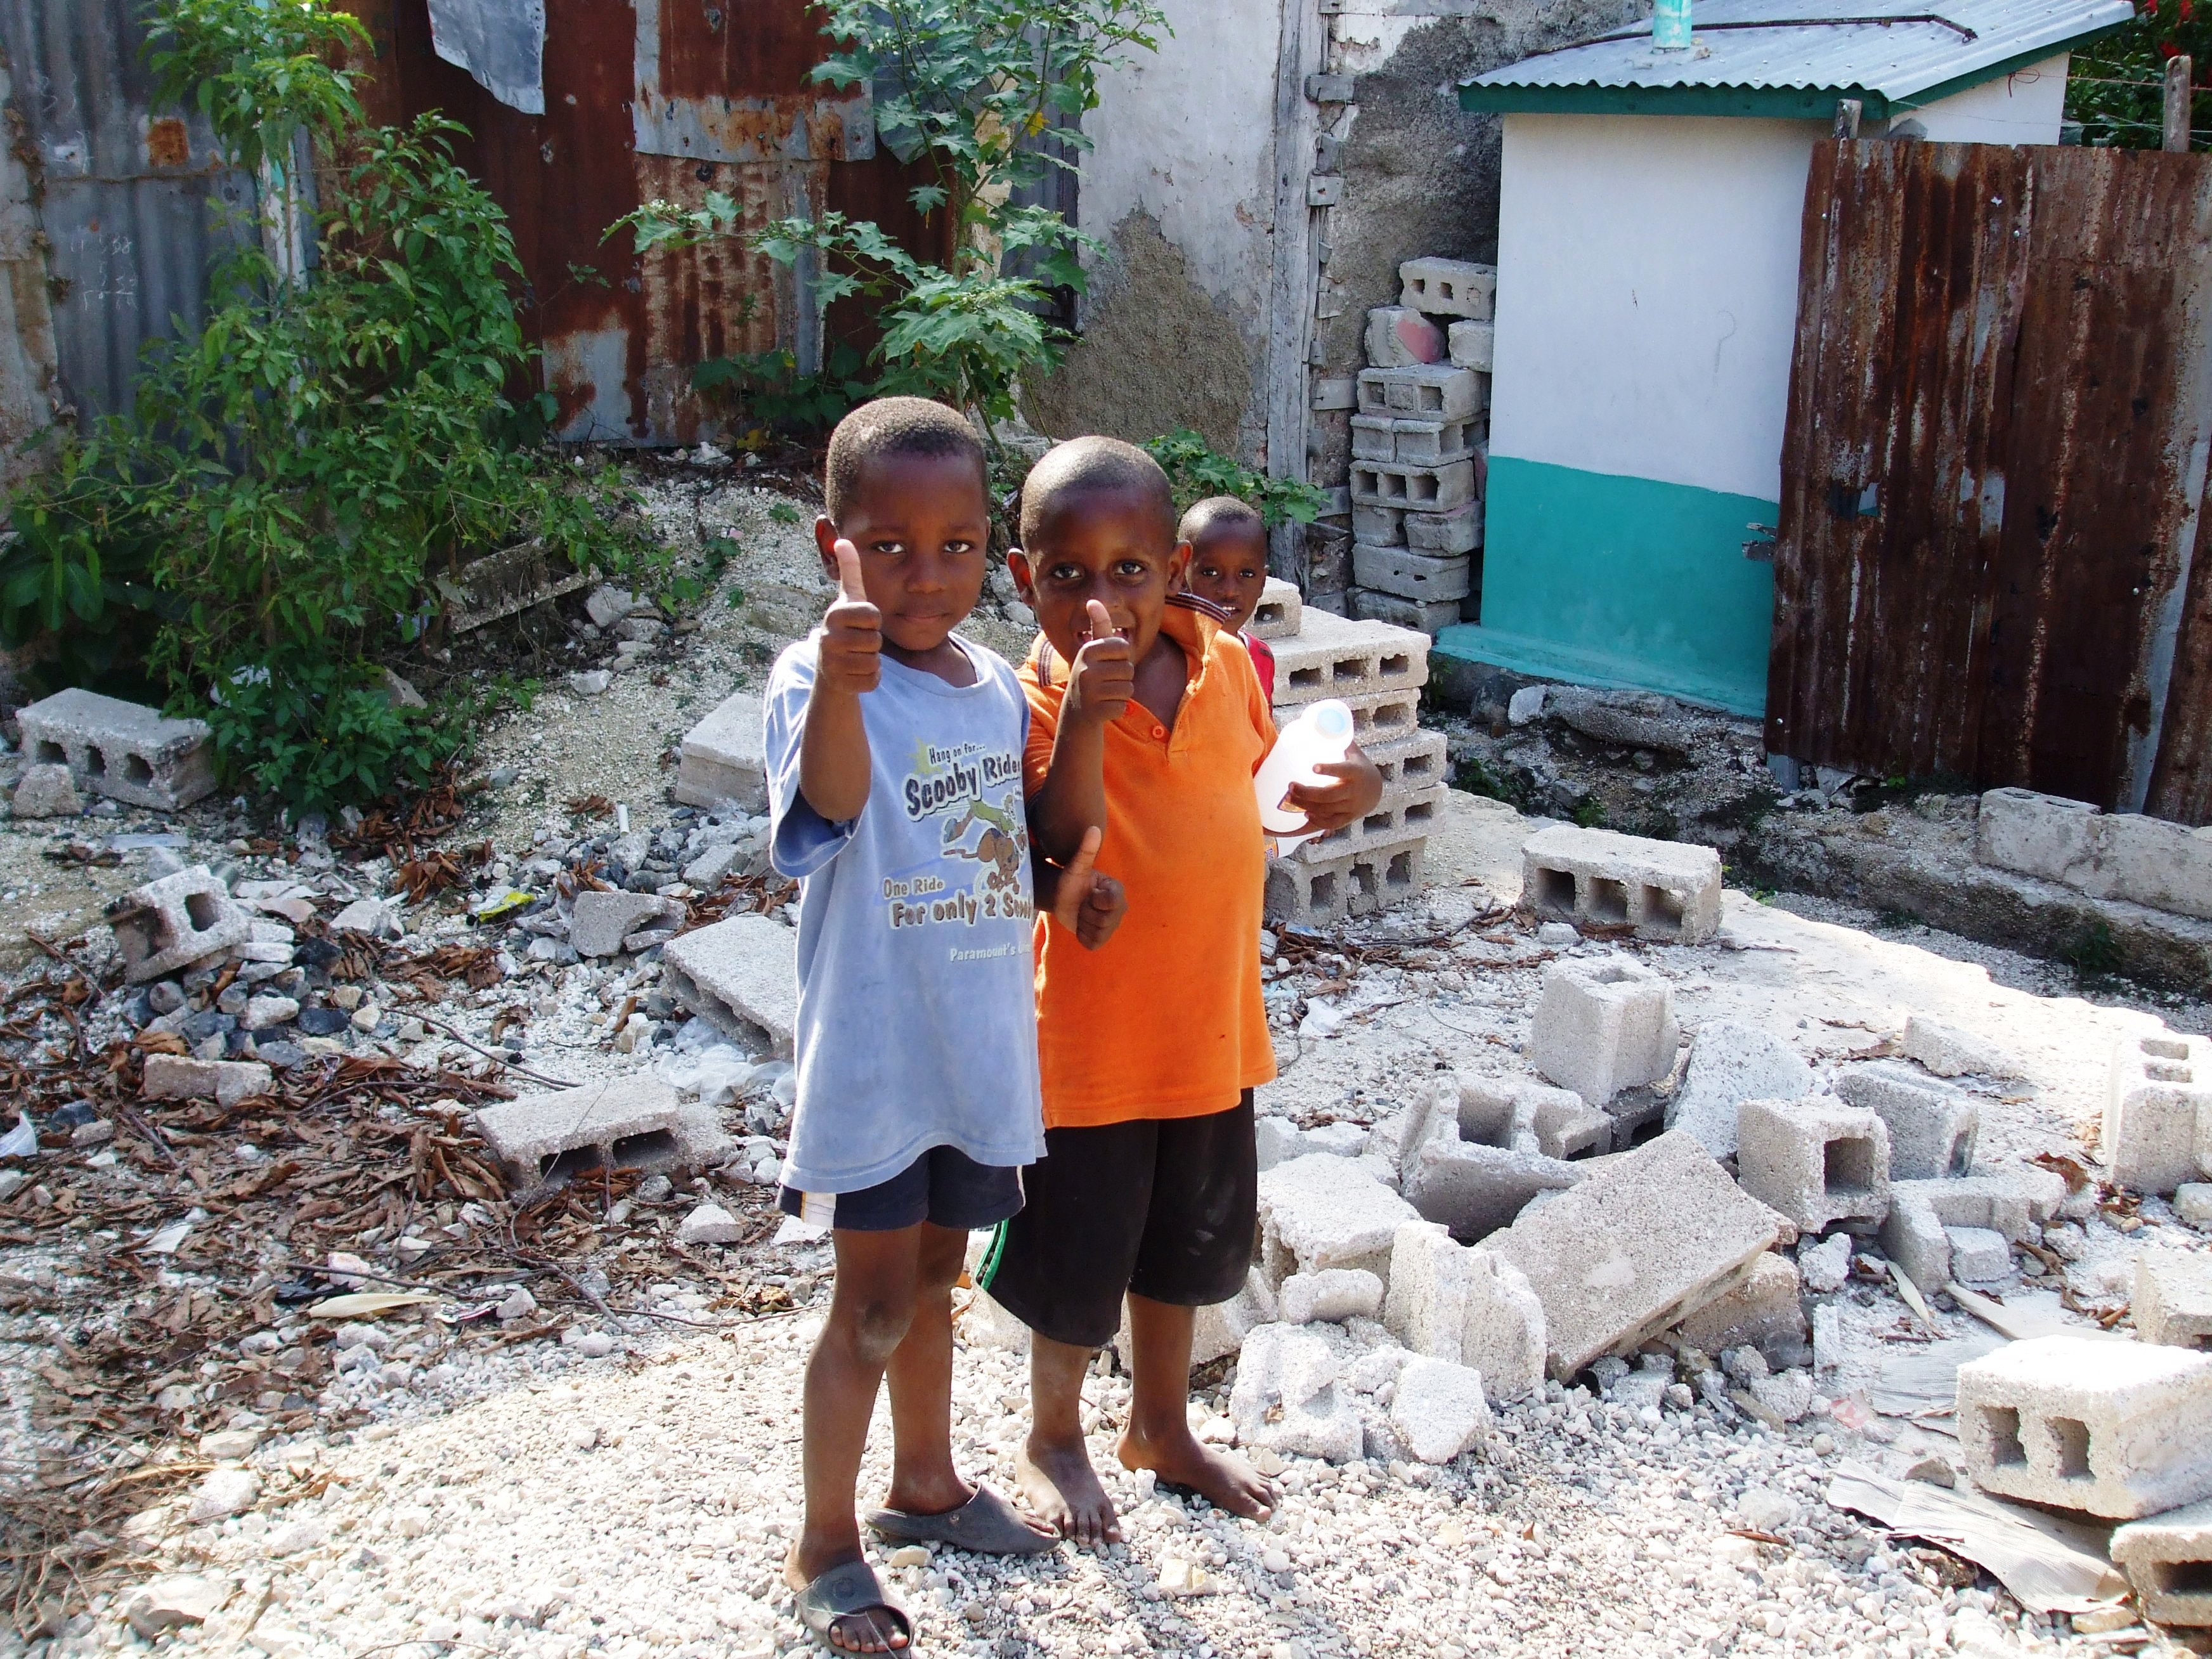 Haitian boys give thumbs up to a new school rising in Petit-Goâve.